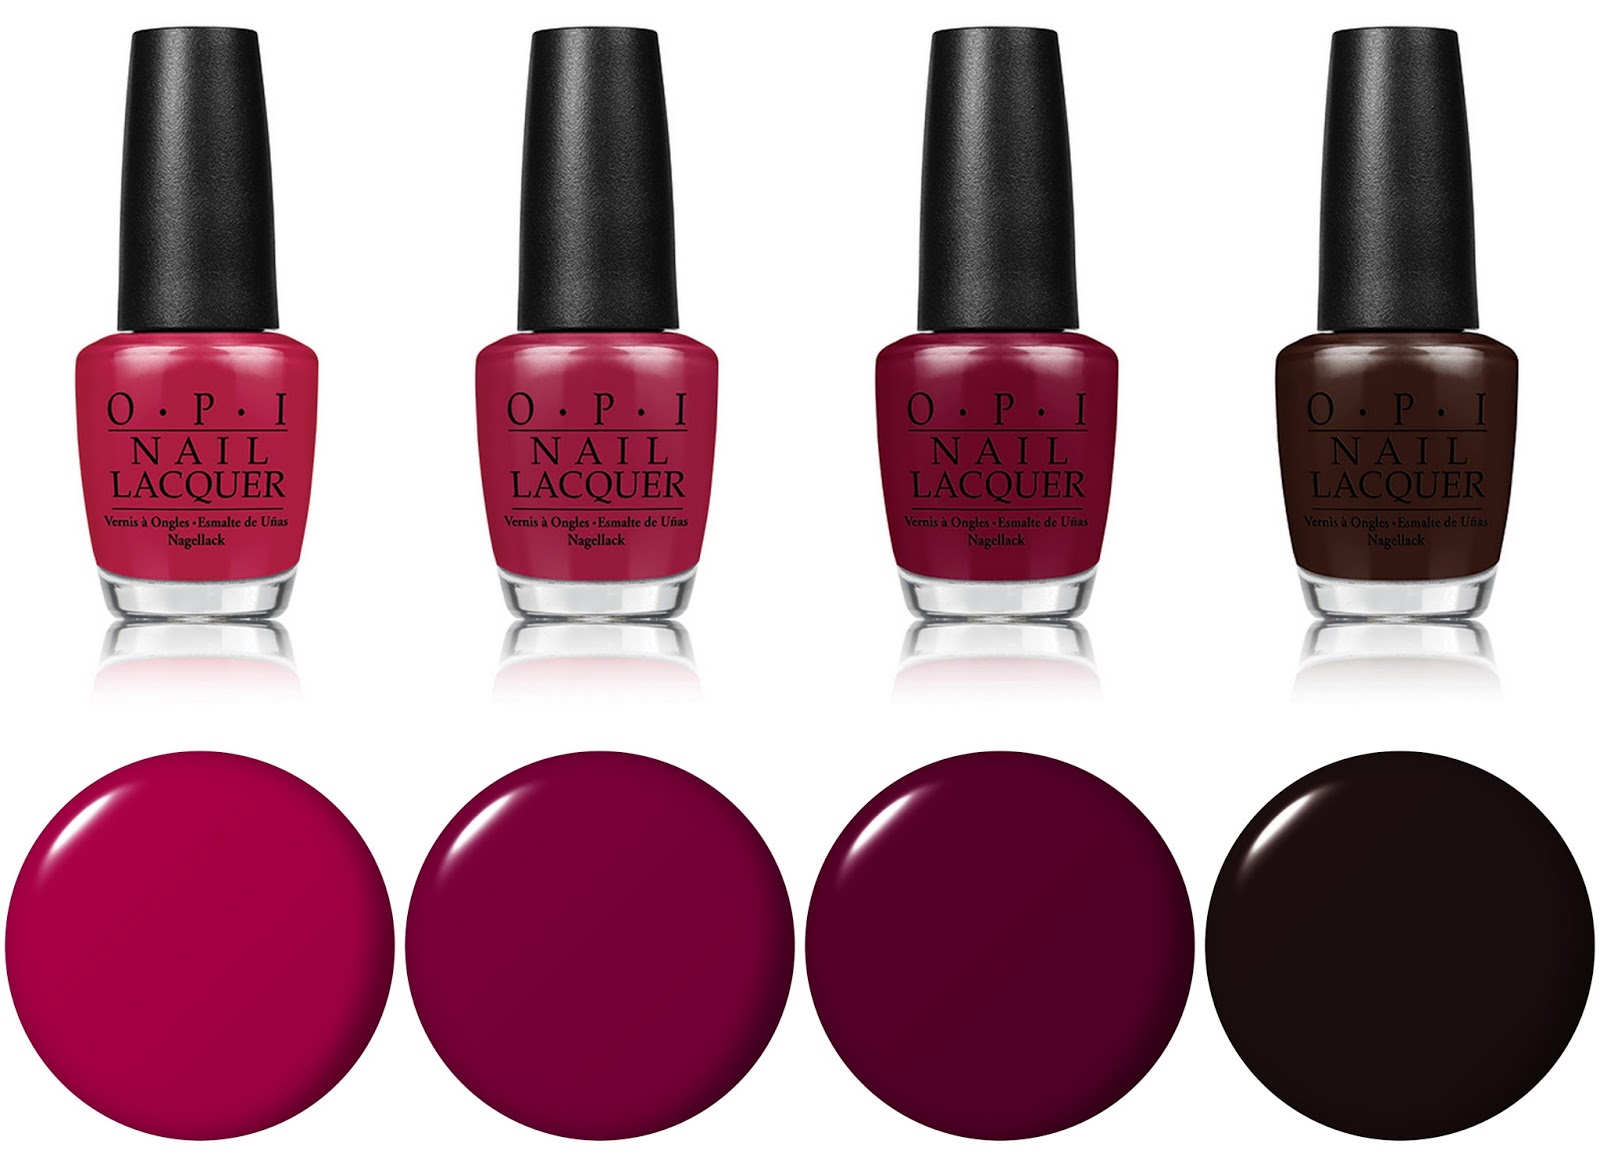 OPI Launches the Washington DC collection for Fall/Winter 2016